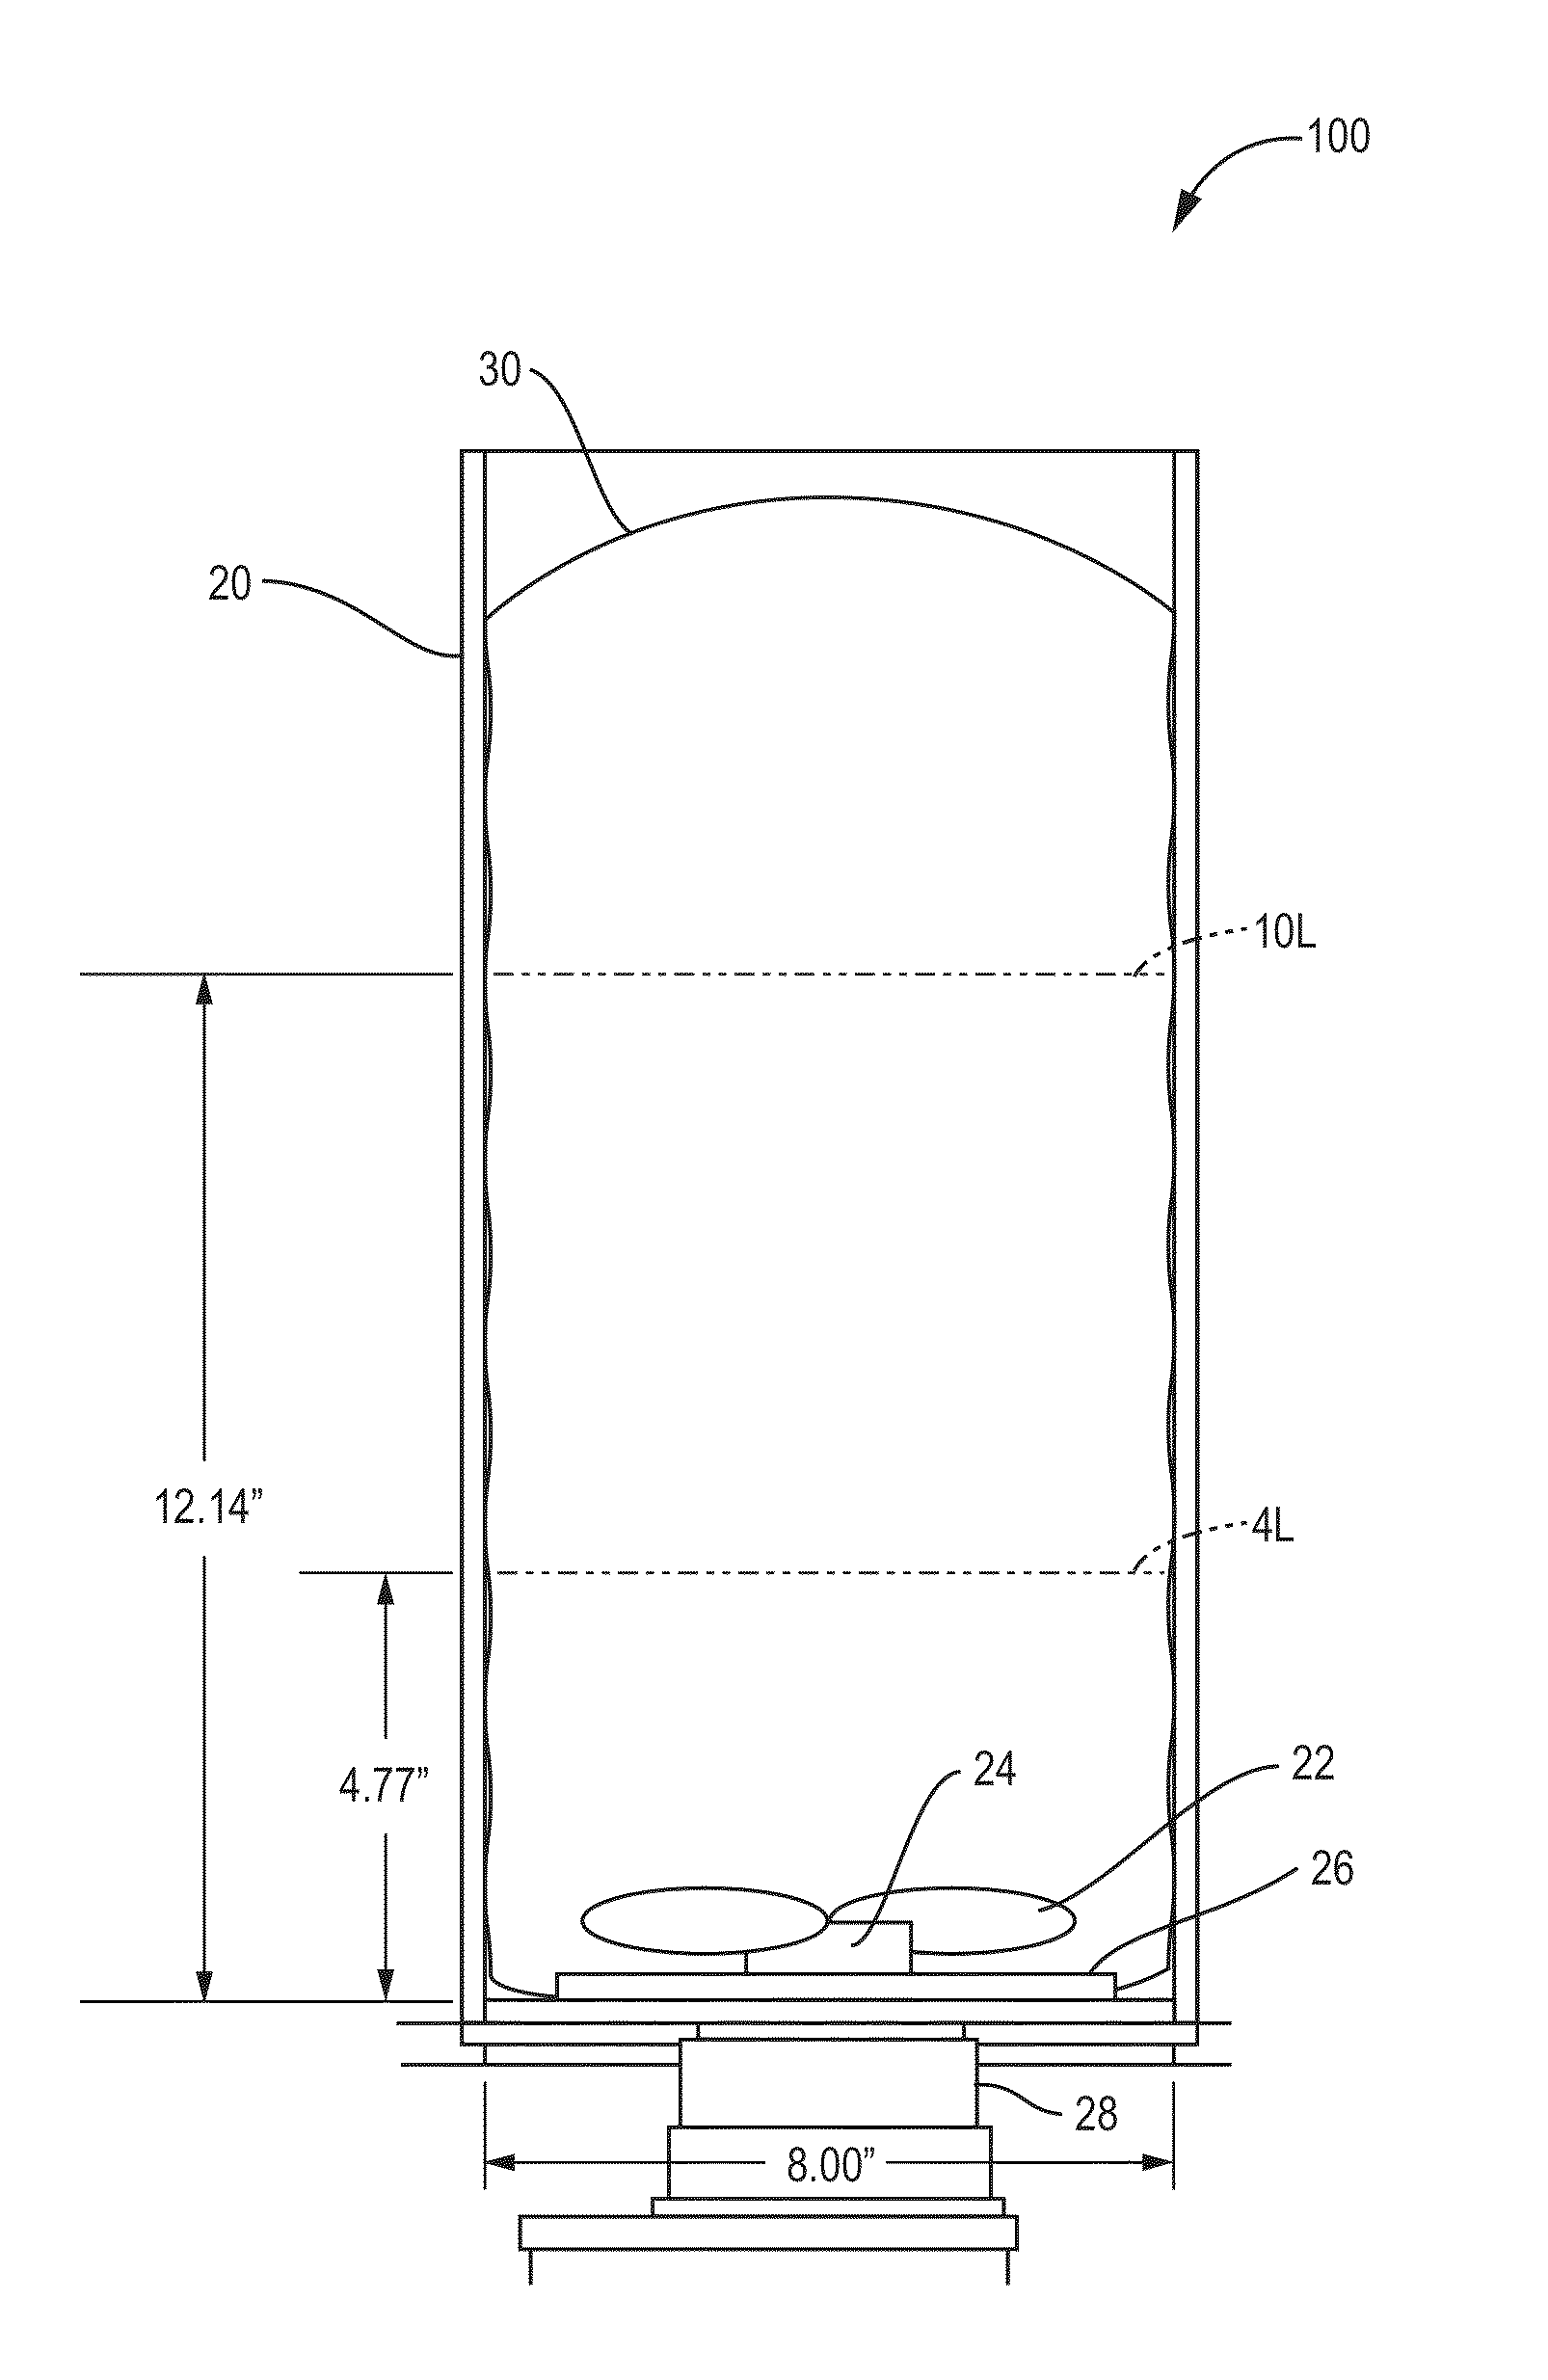 Linearly scalable single use bioreactor system